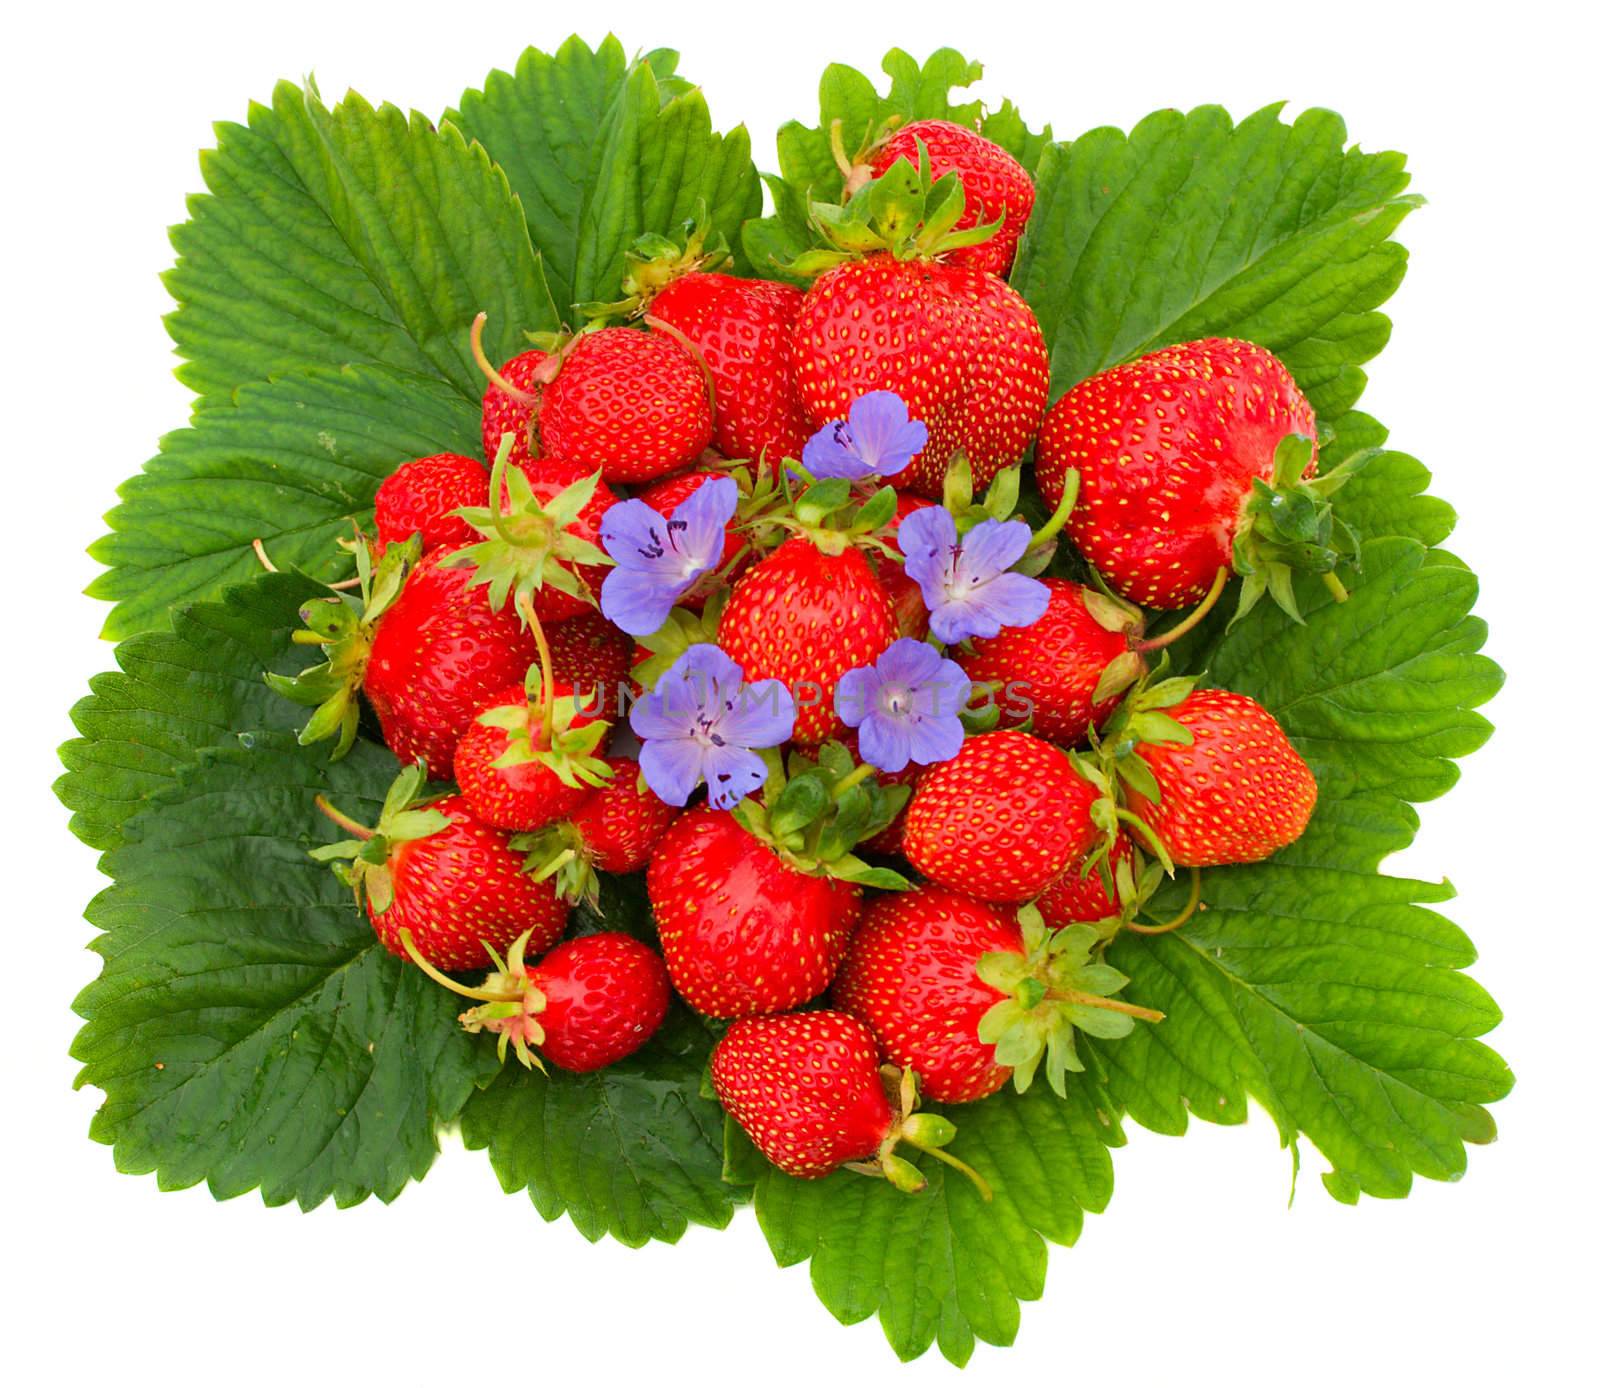 strawberries with flower on leafs by Alekcey